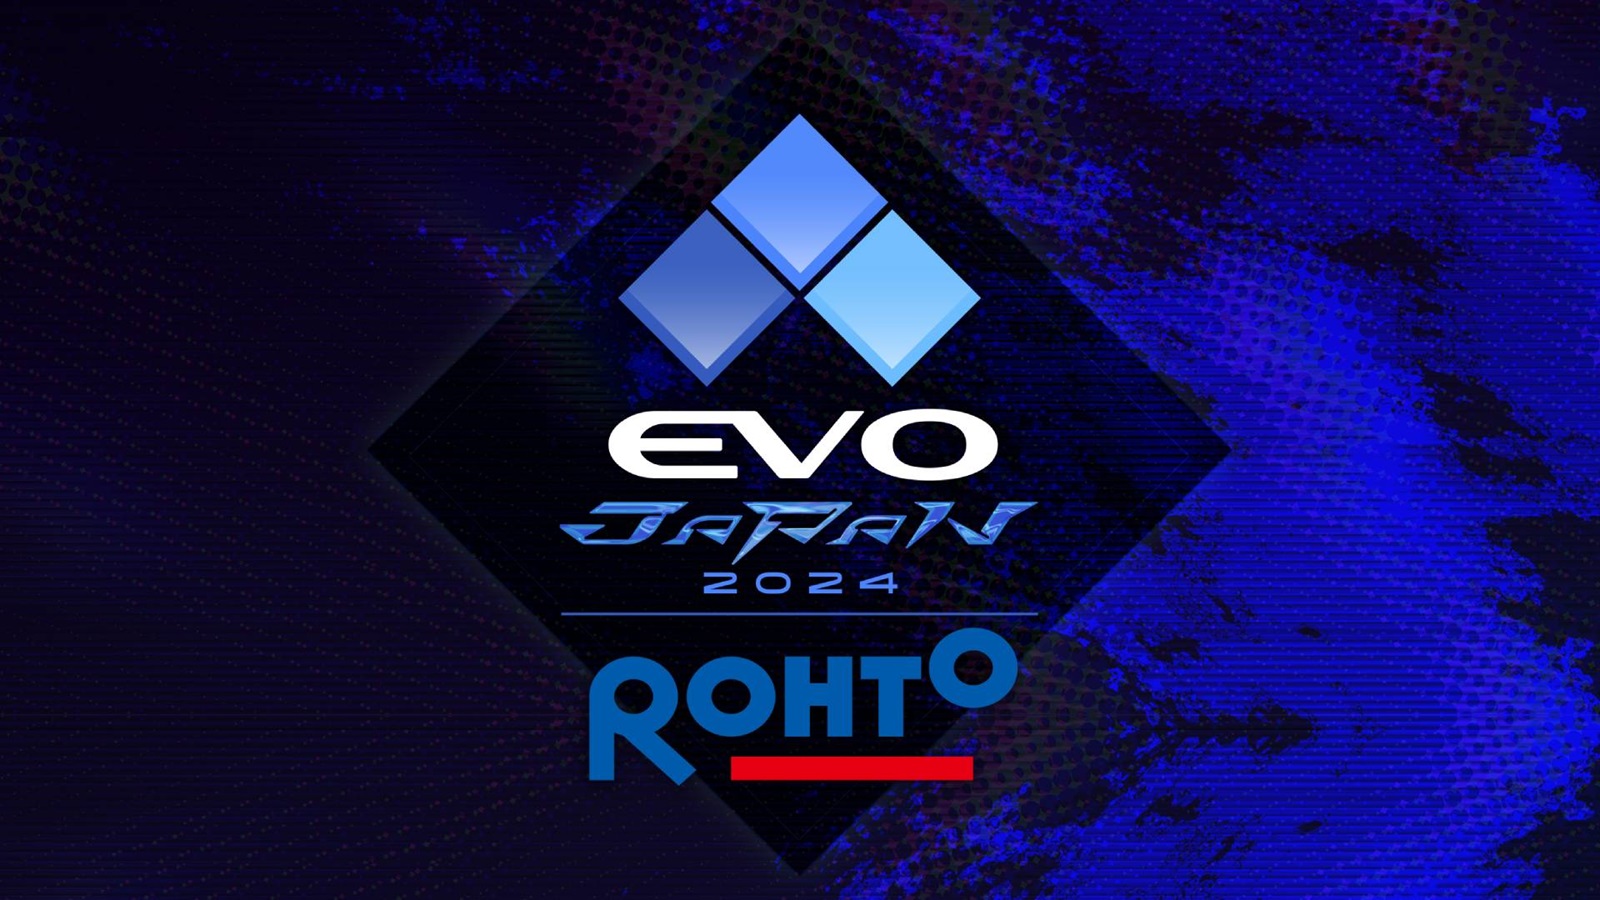 What Surprises Await at EVO 2024 – Games, Schedule, and More?